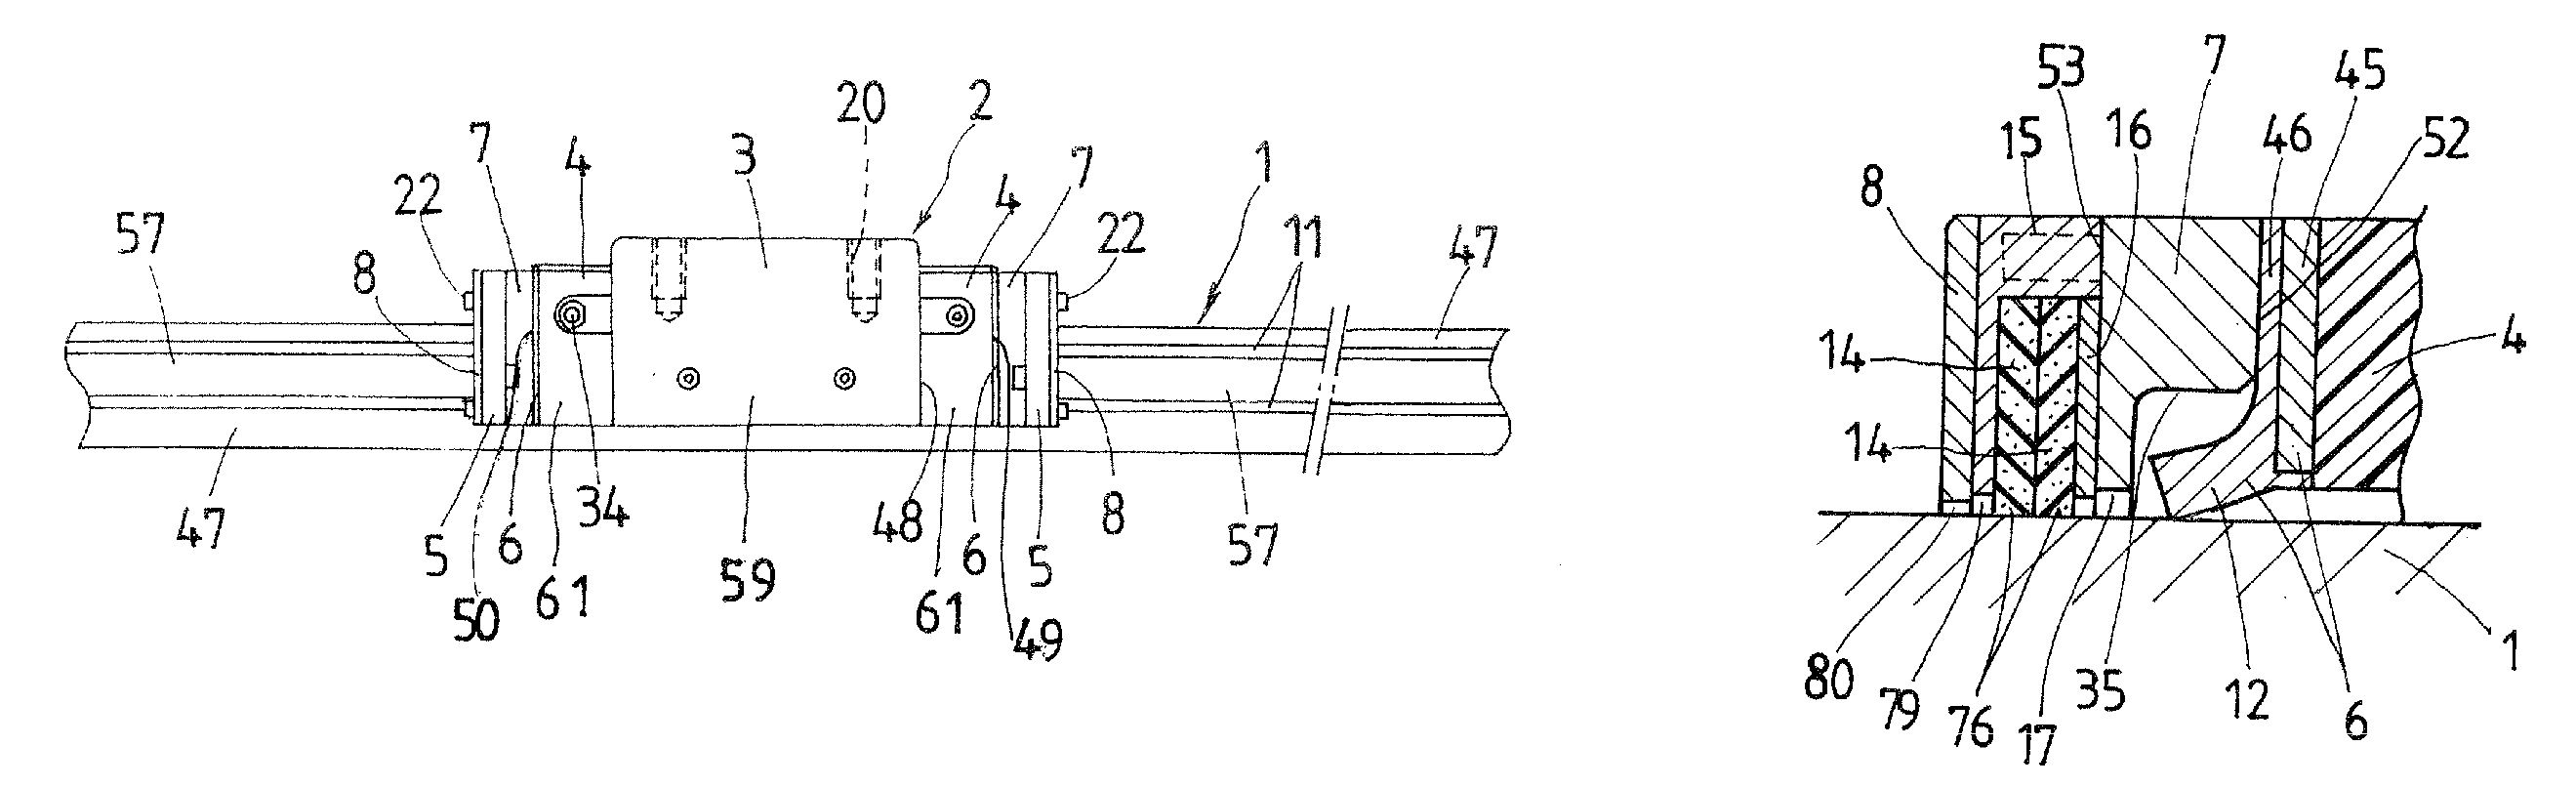 Linear motion guide system with wiper seal